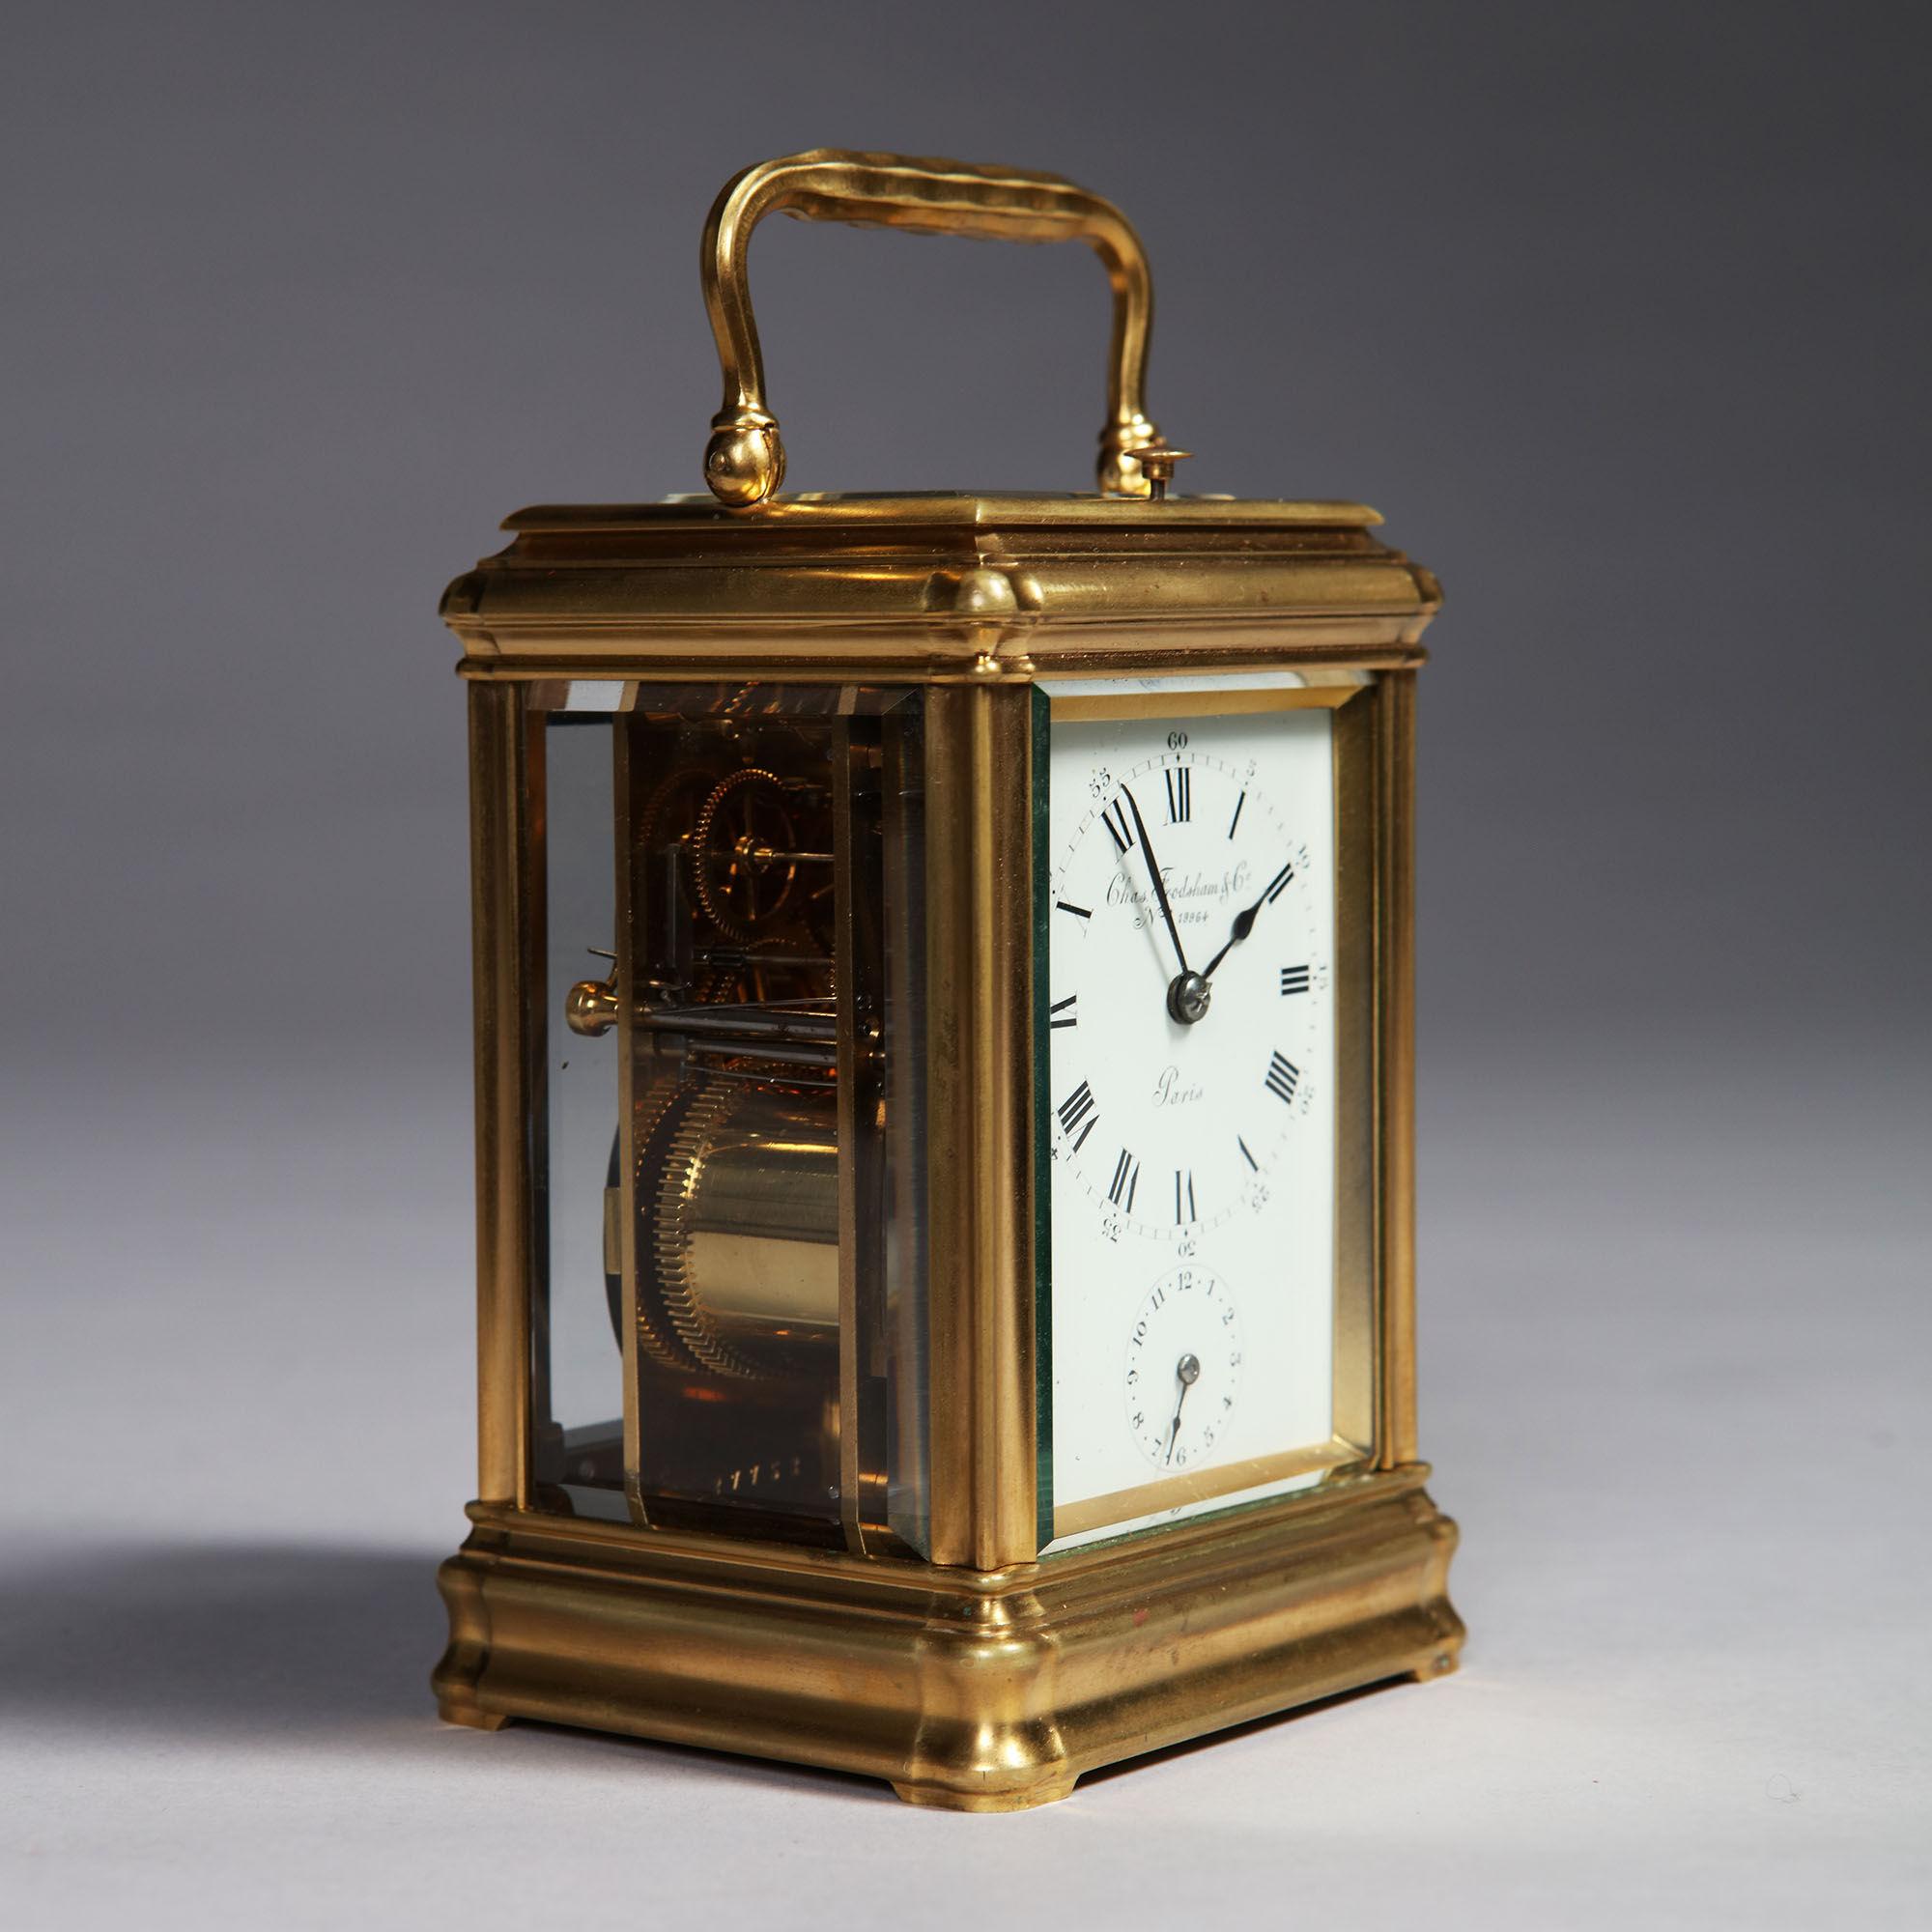 The so-called gorge case has its original gilding. It has bevelled glass panels on all sides so that the movement is entirely visible and is surmounted by a shaped carrying handle. The white enamel dial has a Roman chapter ring, with Arabic